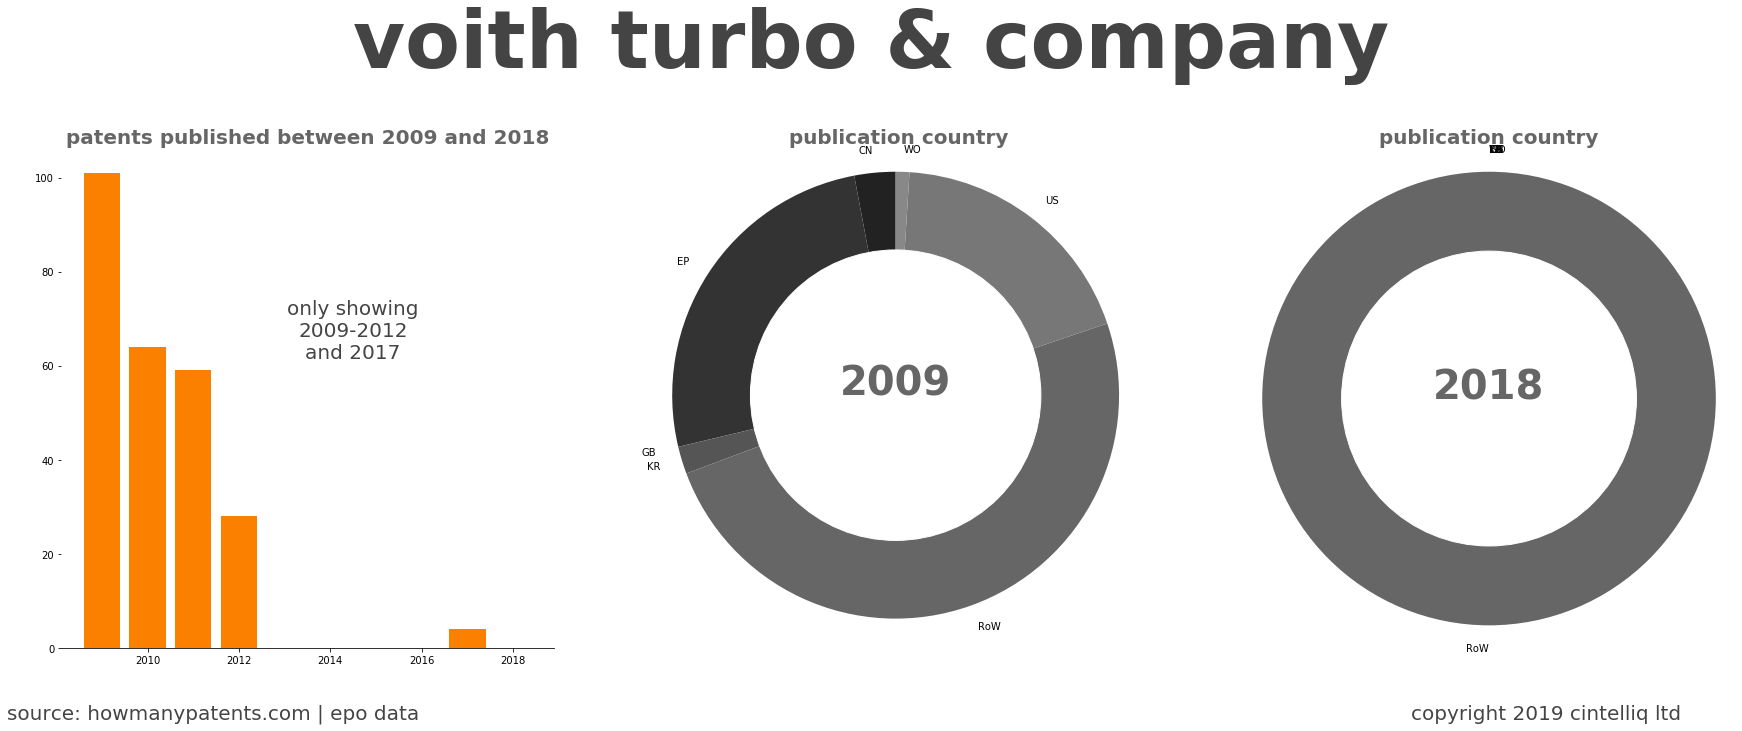 summary of patents for Voith Turbo & Company